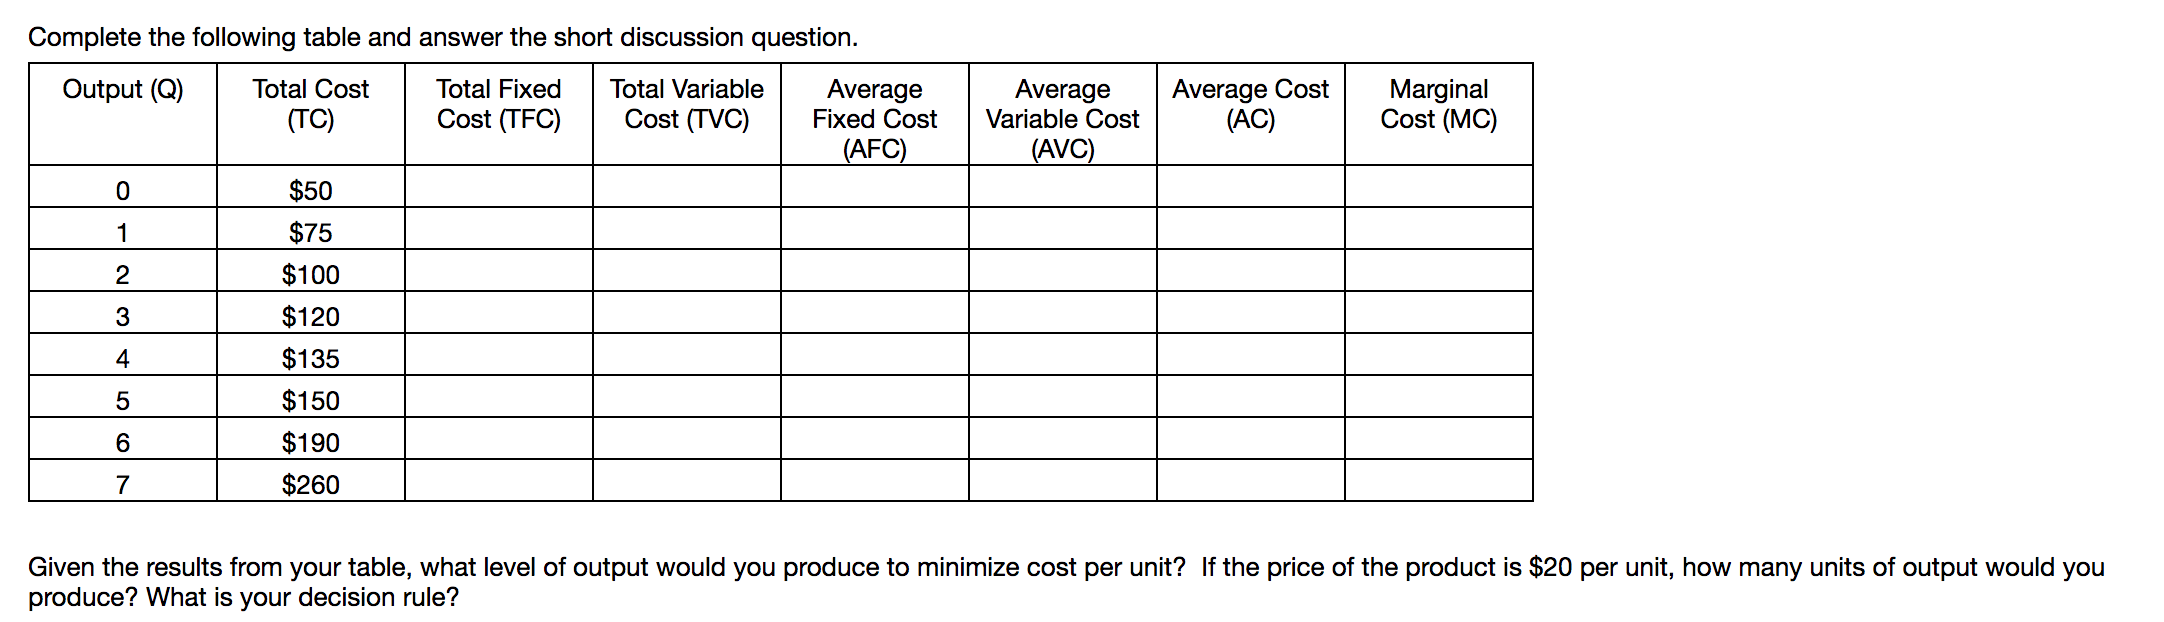 Complete the following table and answer the short discussion question.
Average Cost
(AC)
Average
Fixed Cost
Total Cost
Average
Variable Cost
Output (Q)
Total Fixed
Total Variable
Marginal
Cost (MC)
Cost (TVC)
Cost (TFC)
(TC)
(AFC)
(AVC)
$50
$75
1
$100
2
$120
3
$135
4
$150
5
$190
6
$260
Given the results from your table, what level of output would you produce to minimize cost per unit? If the price of the product is $20 per unit, how many units of output would you
produce? What is your decision rule?
